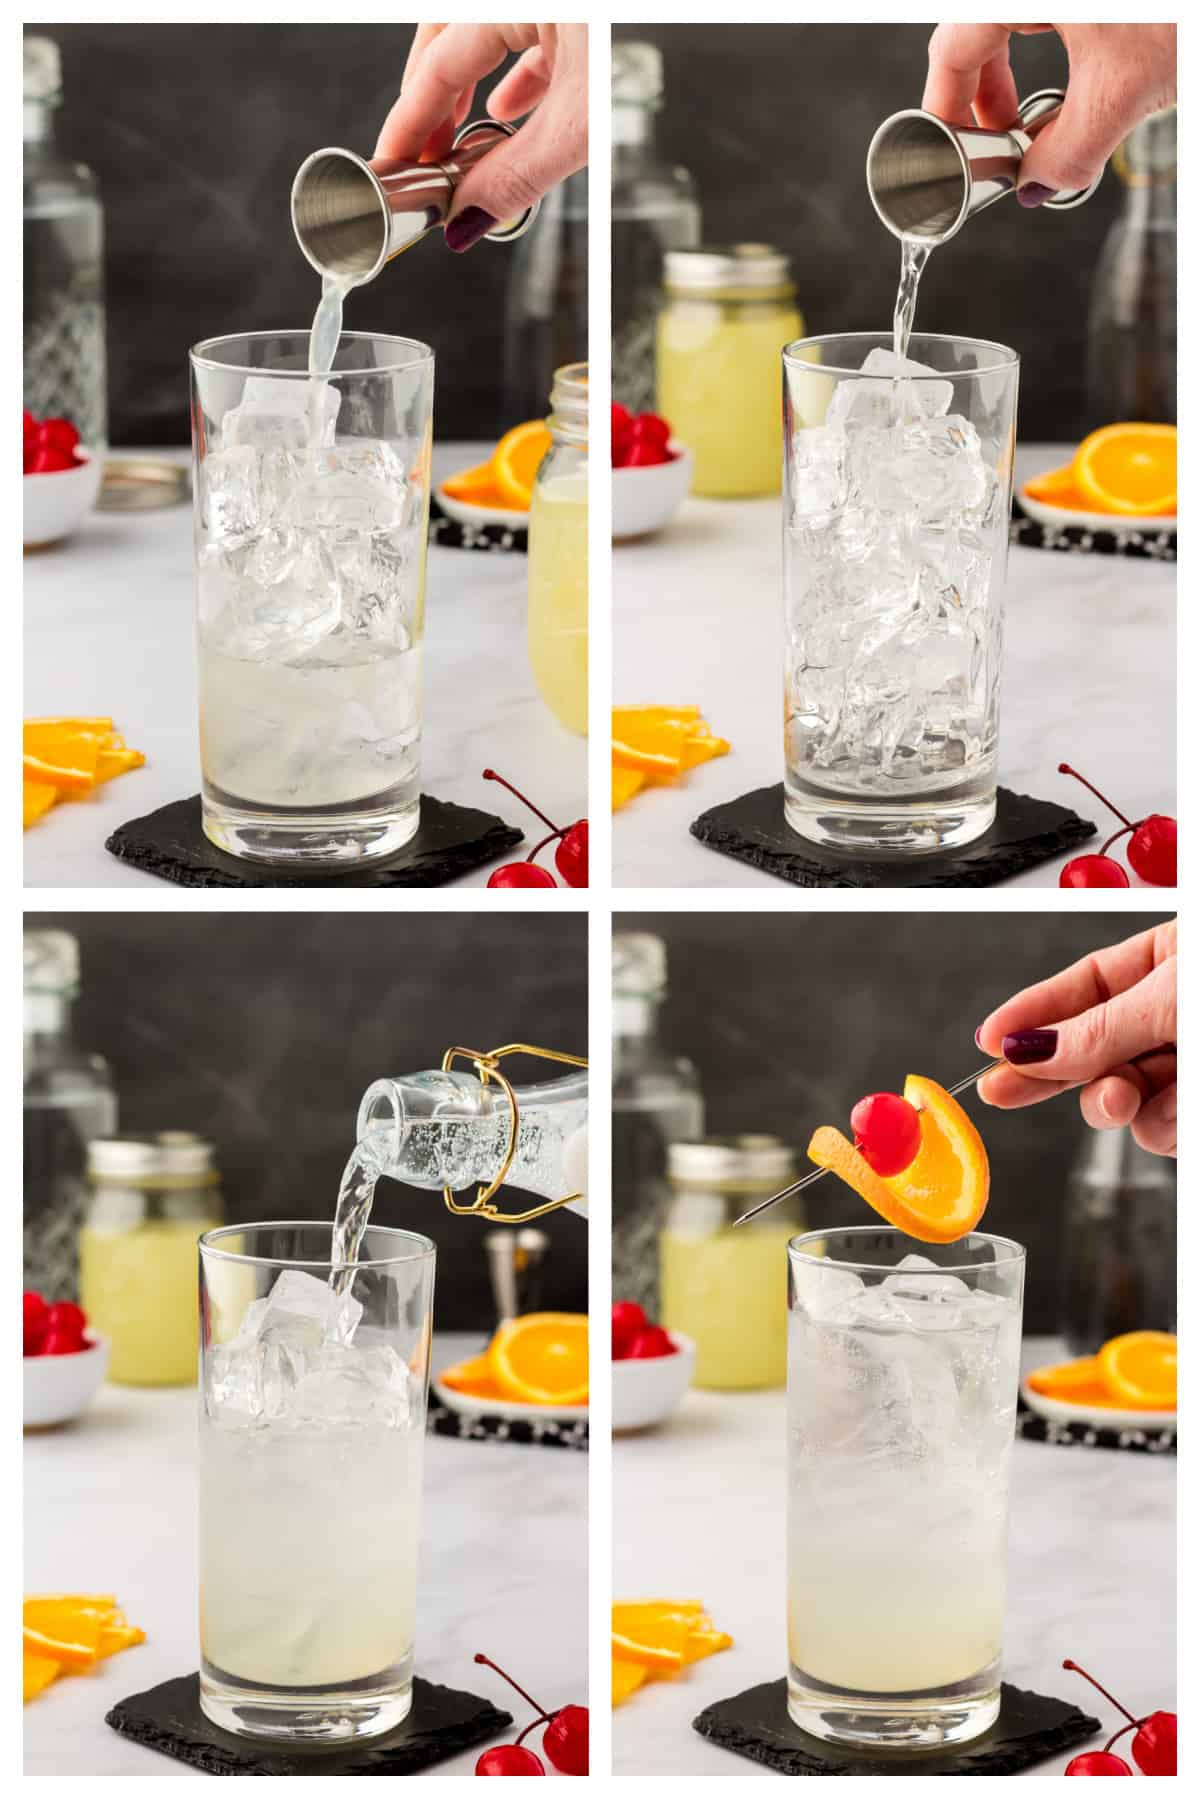 Collage showing how to make vodka collins recipe.